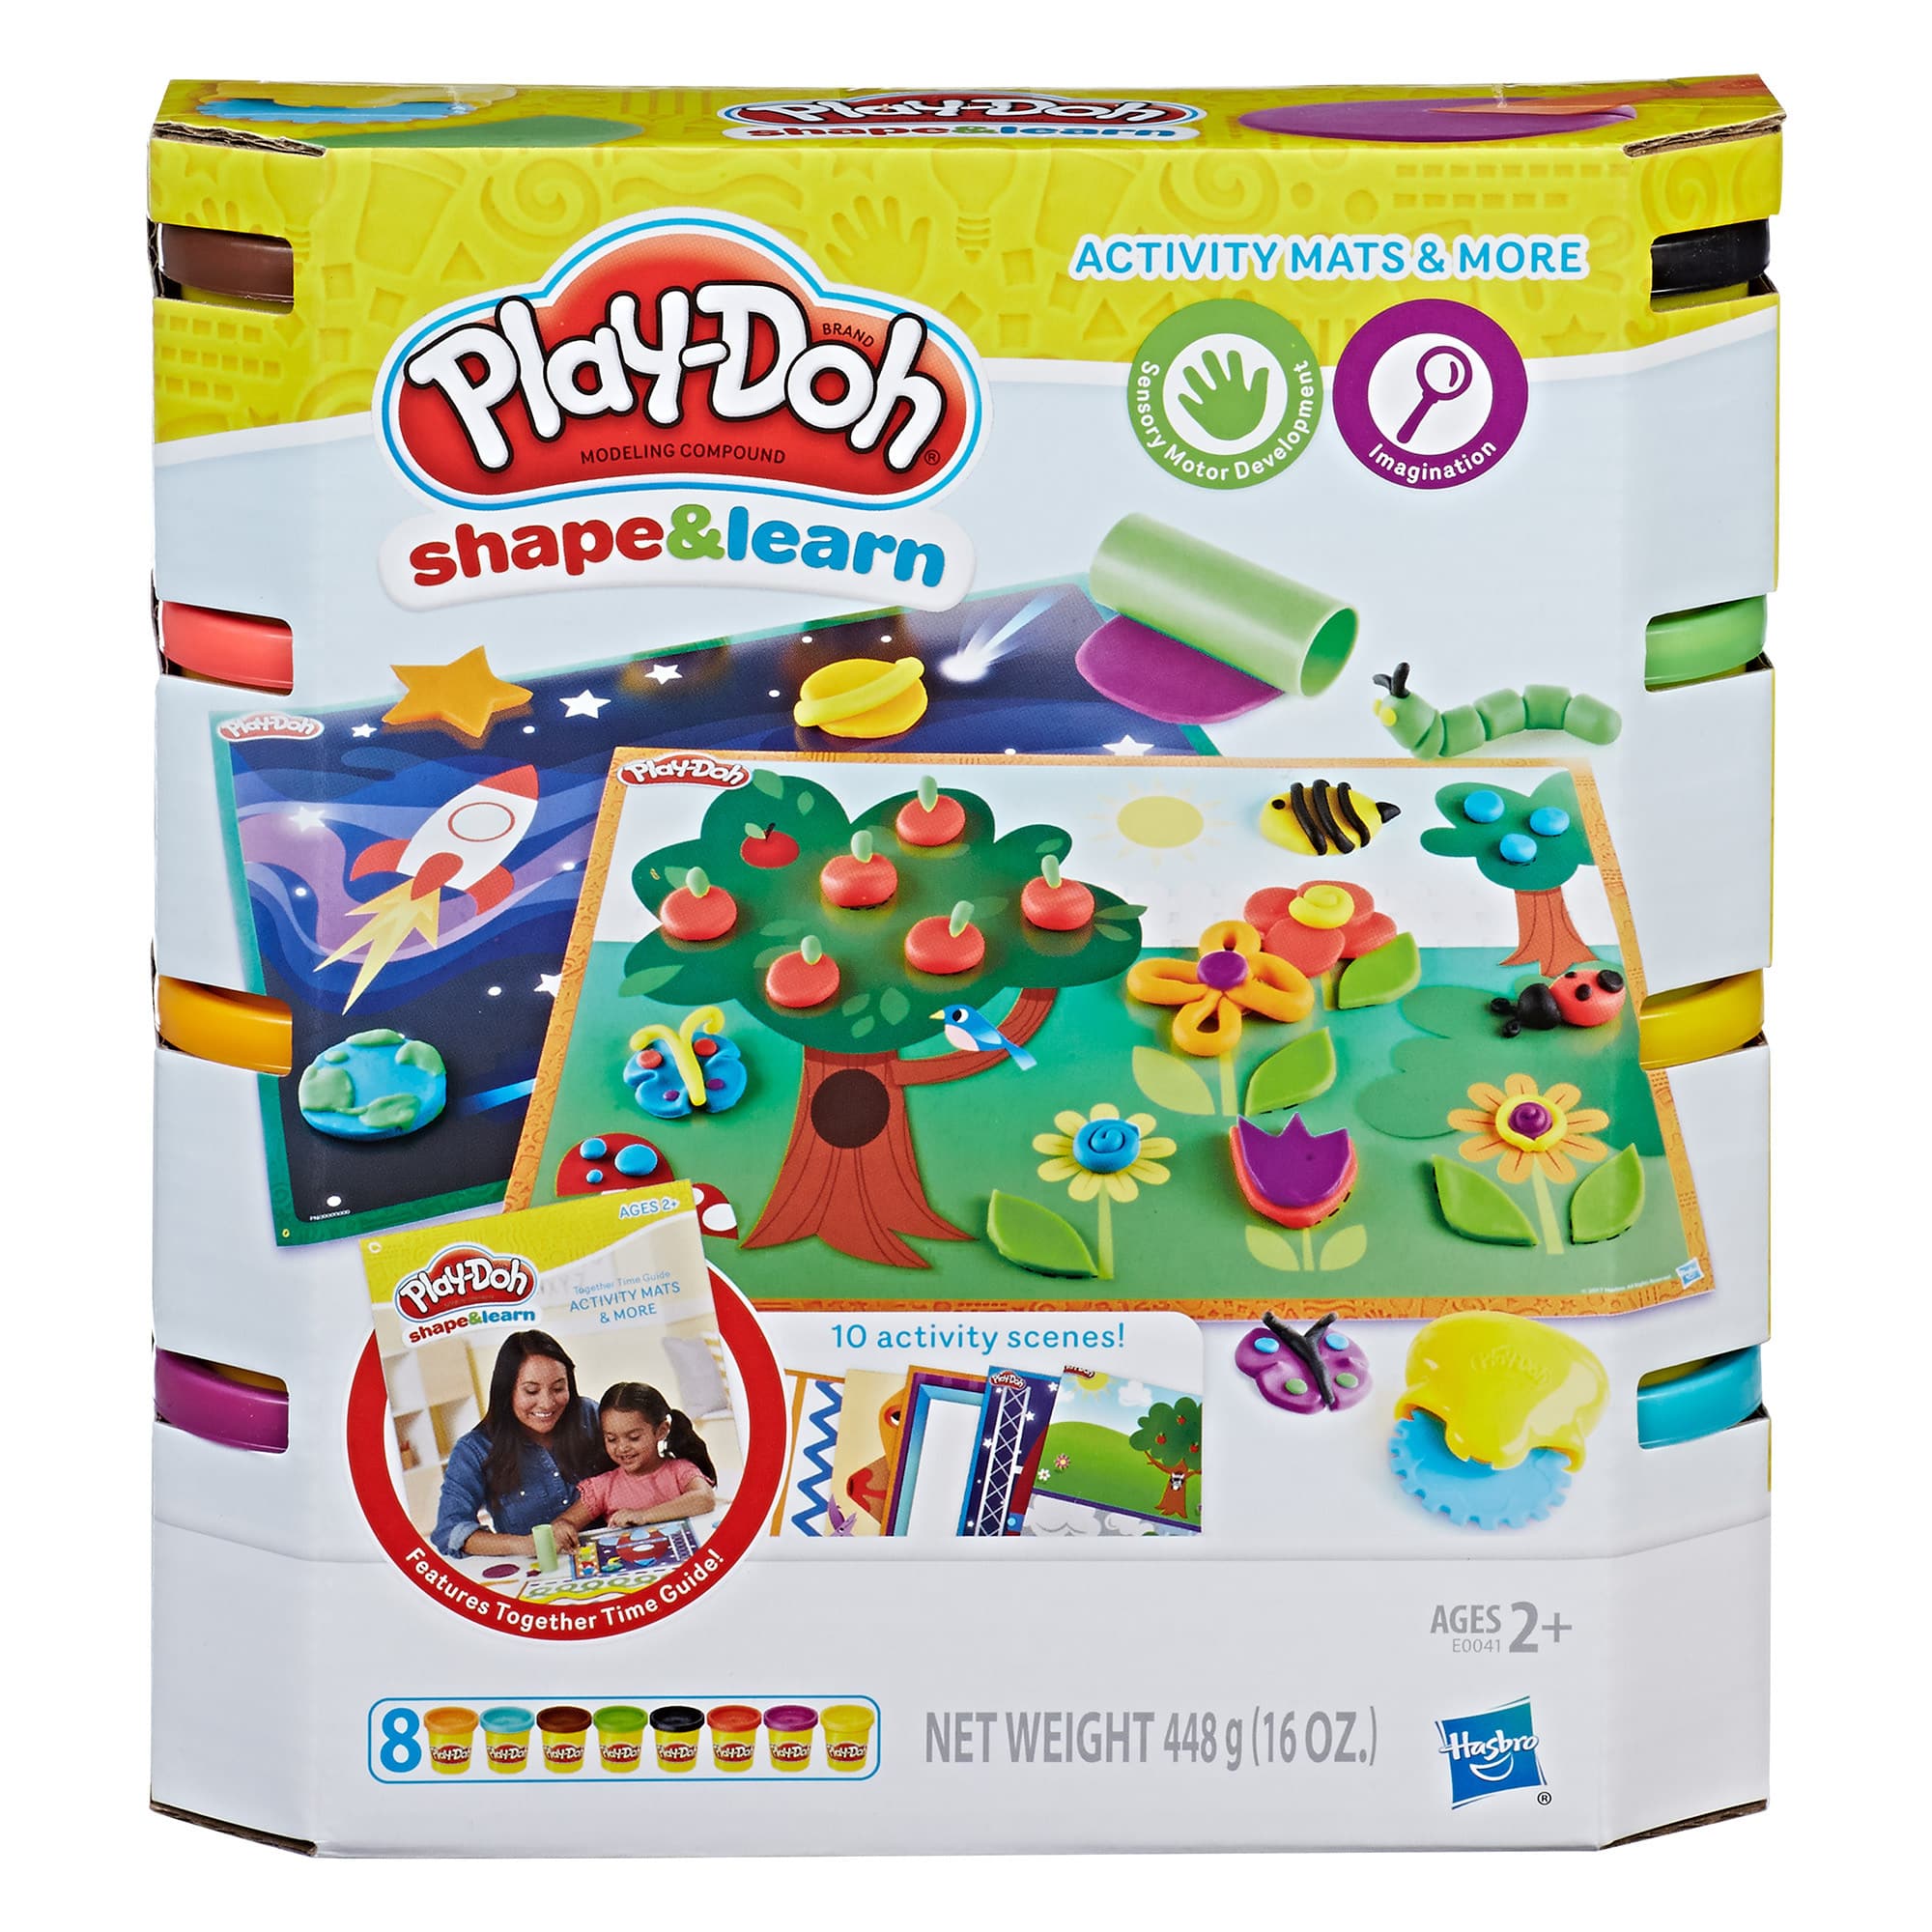 Play-Doh Shape & Learn - Activity Mats & More